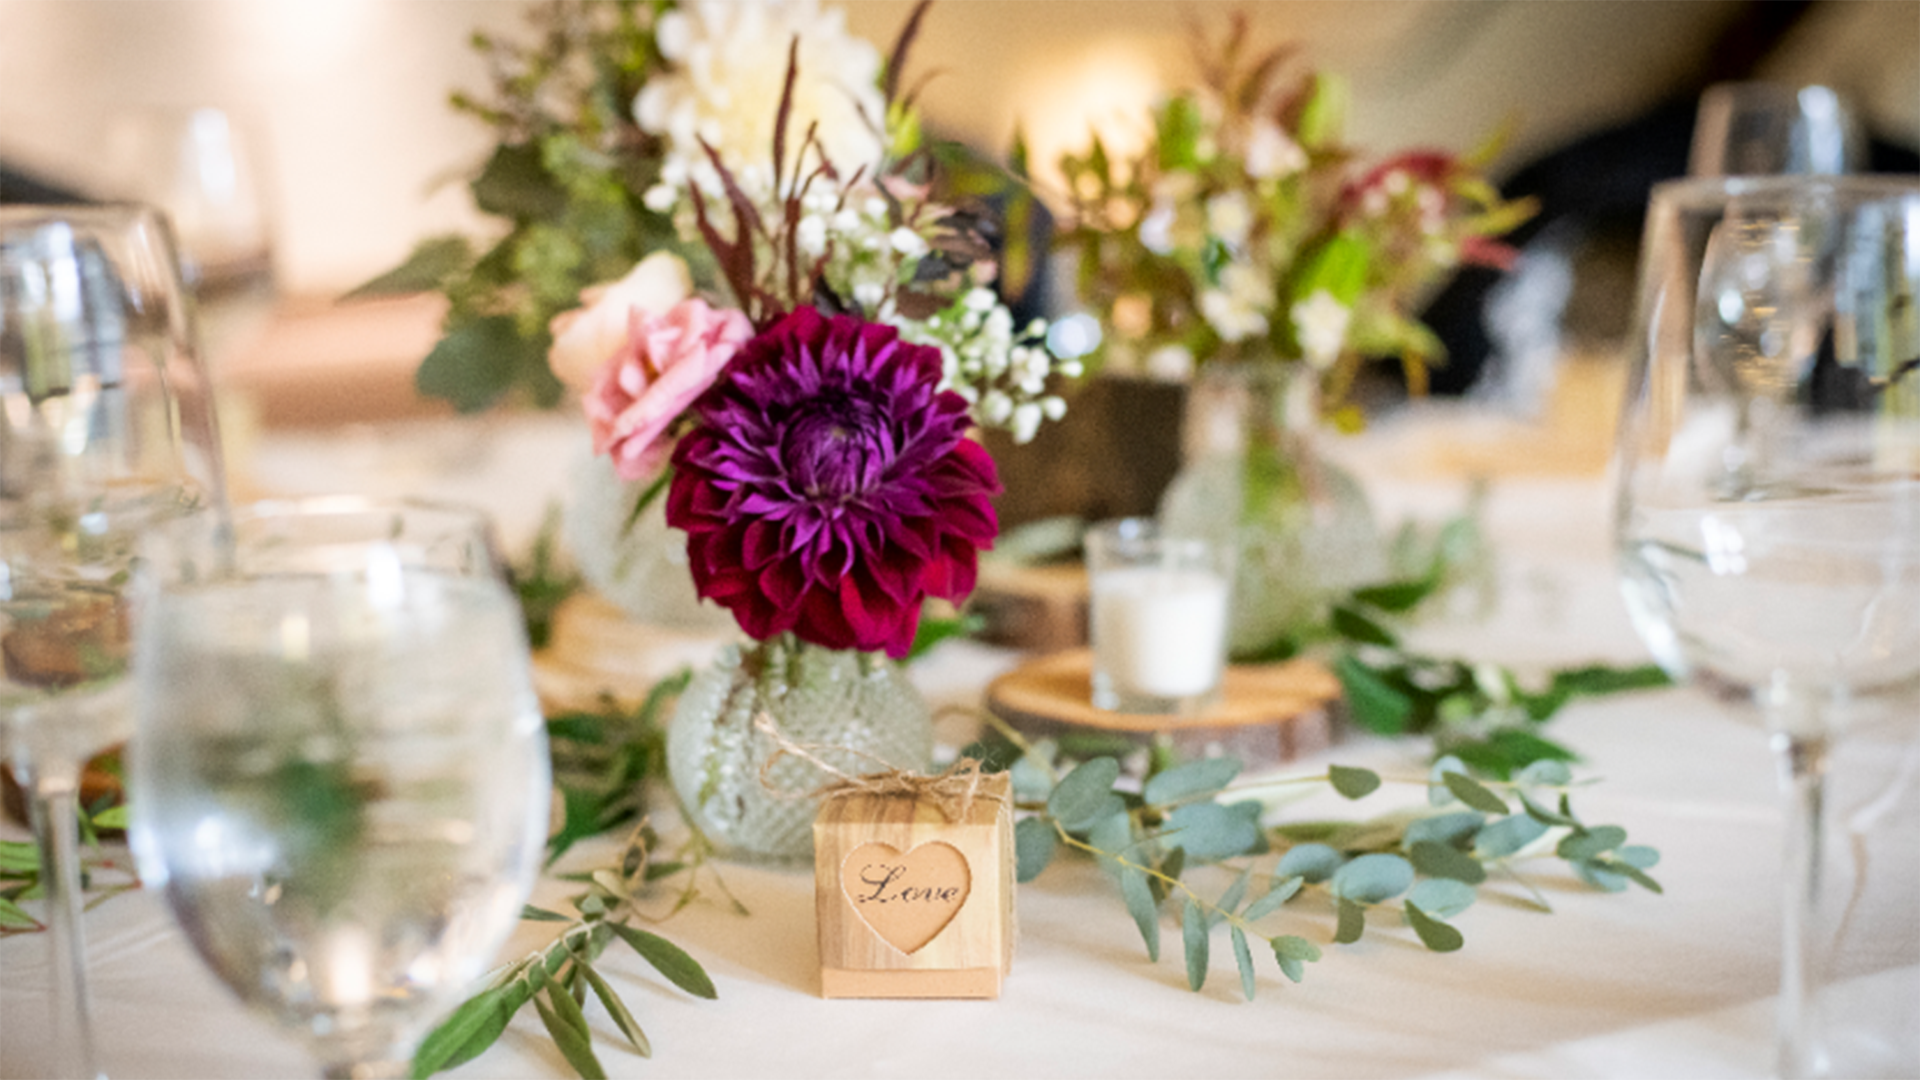 A flower arrangement on a table setting for a wedding.